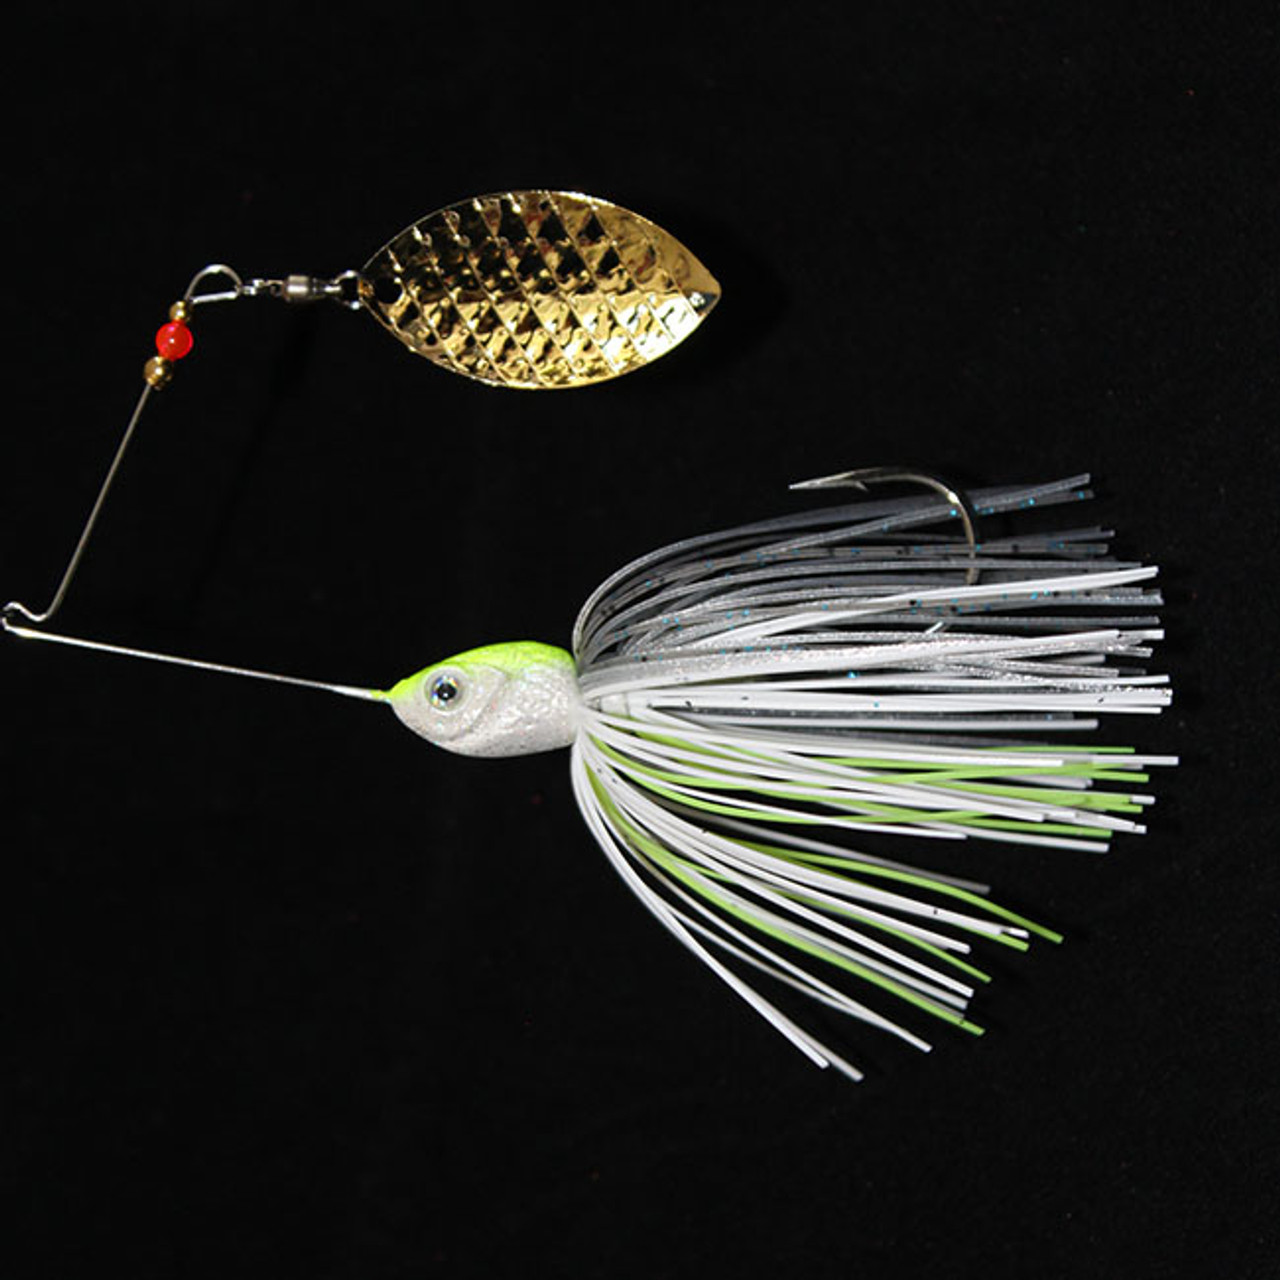 Glamour Shad™ Spinnerbait With Double Colorado Blades